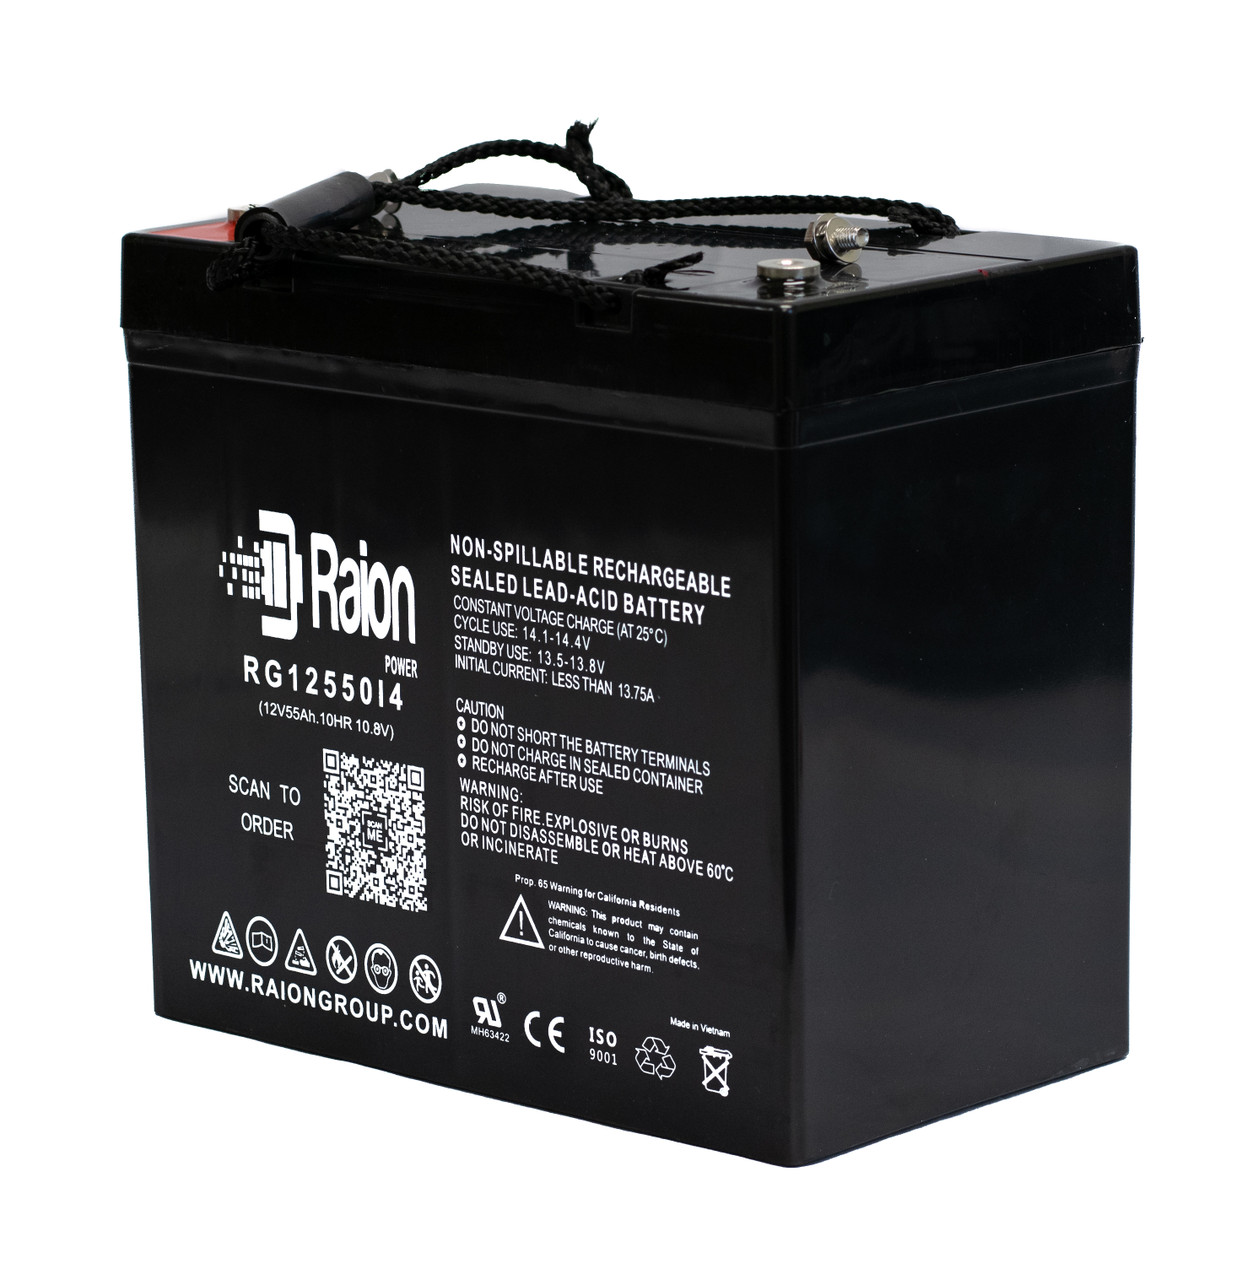 Raion Power 12V 55Ah 22NF Mobility Scooter Battery Replacement for Pride Jazzy 600